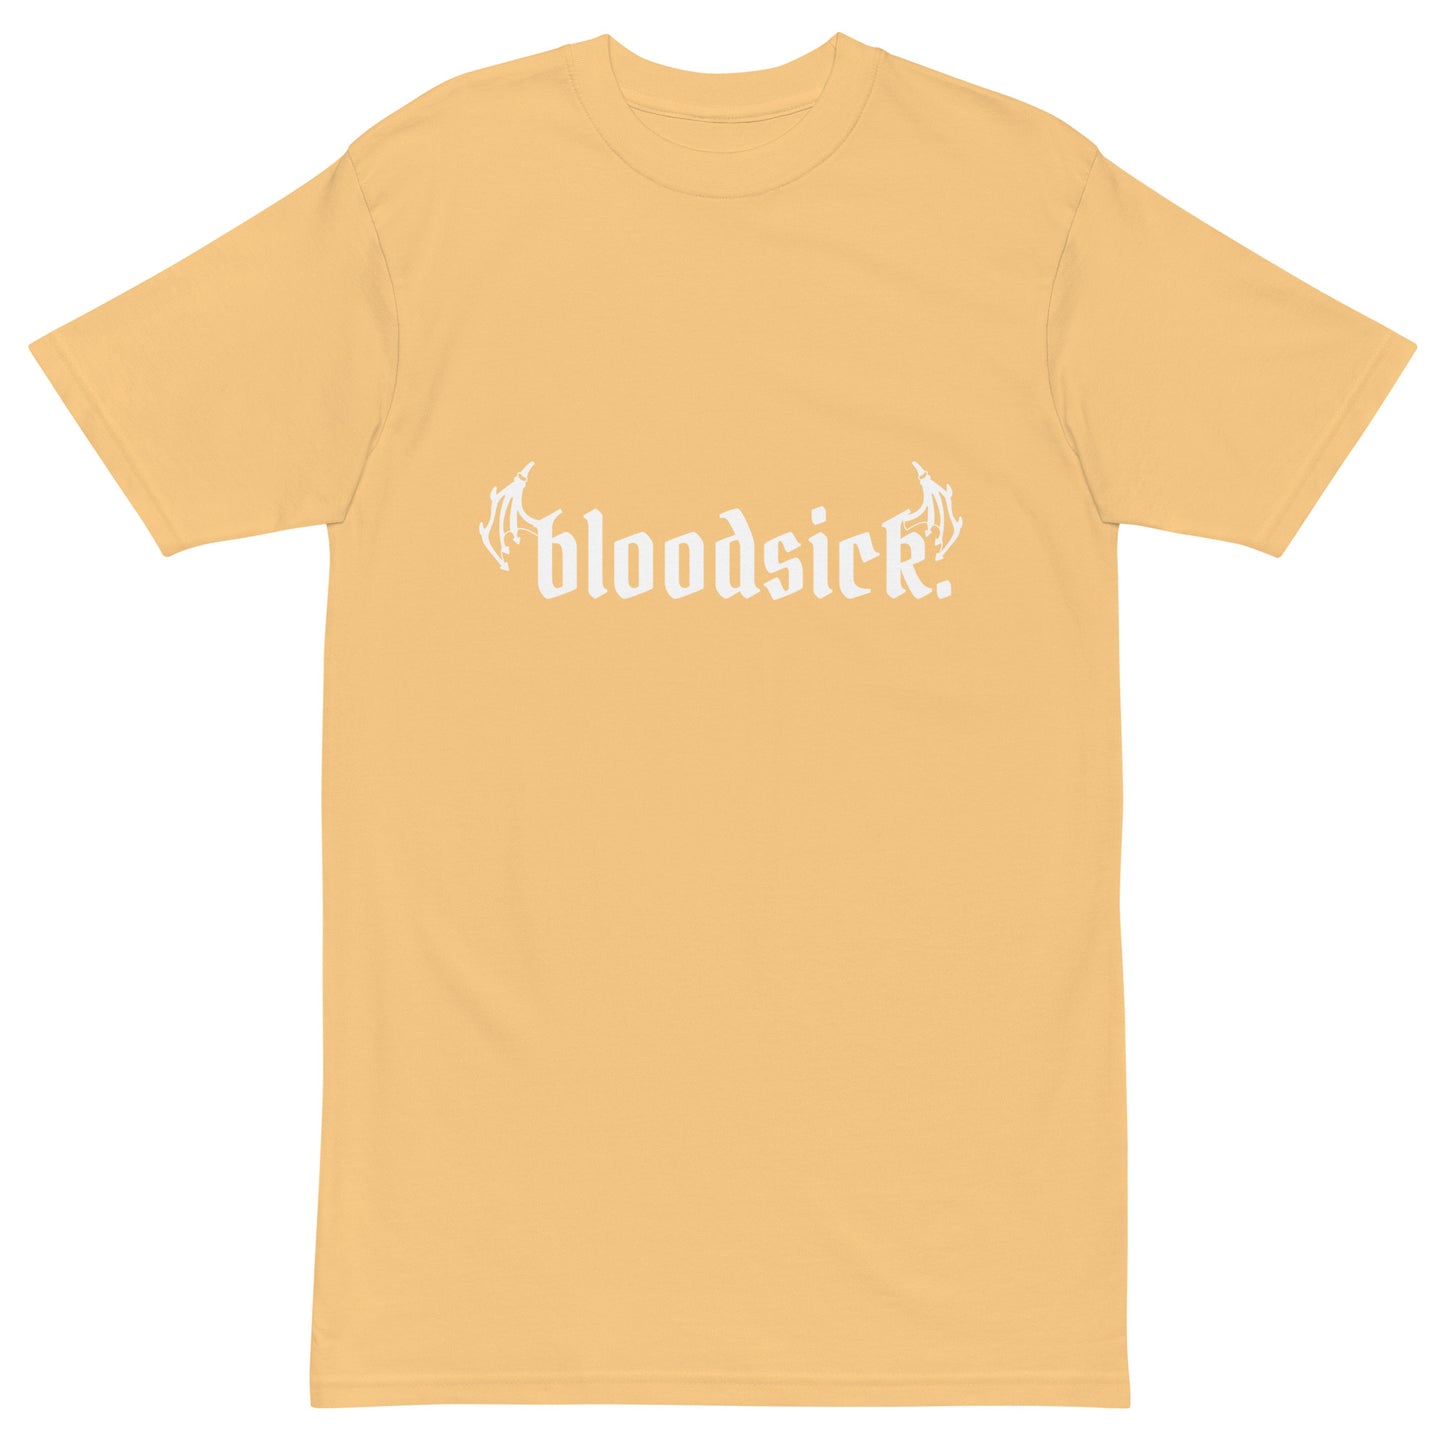 bloodsick. - OUT FOR BLOOD Heavyweight Tee